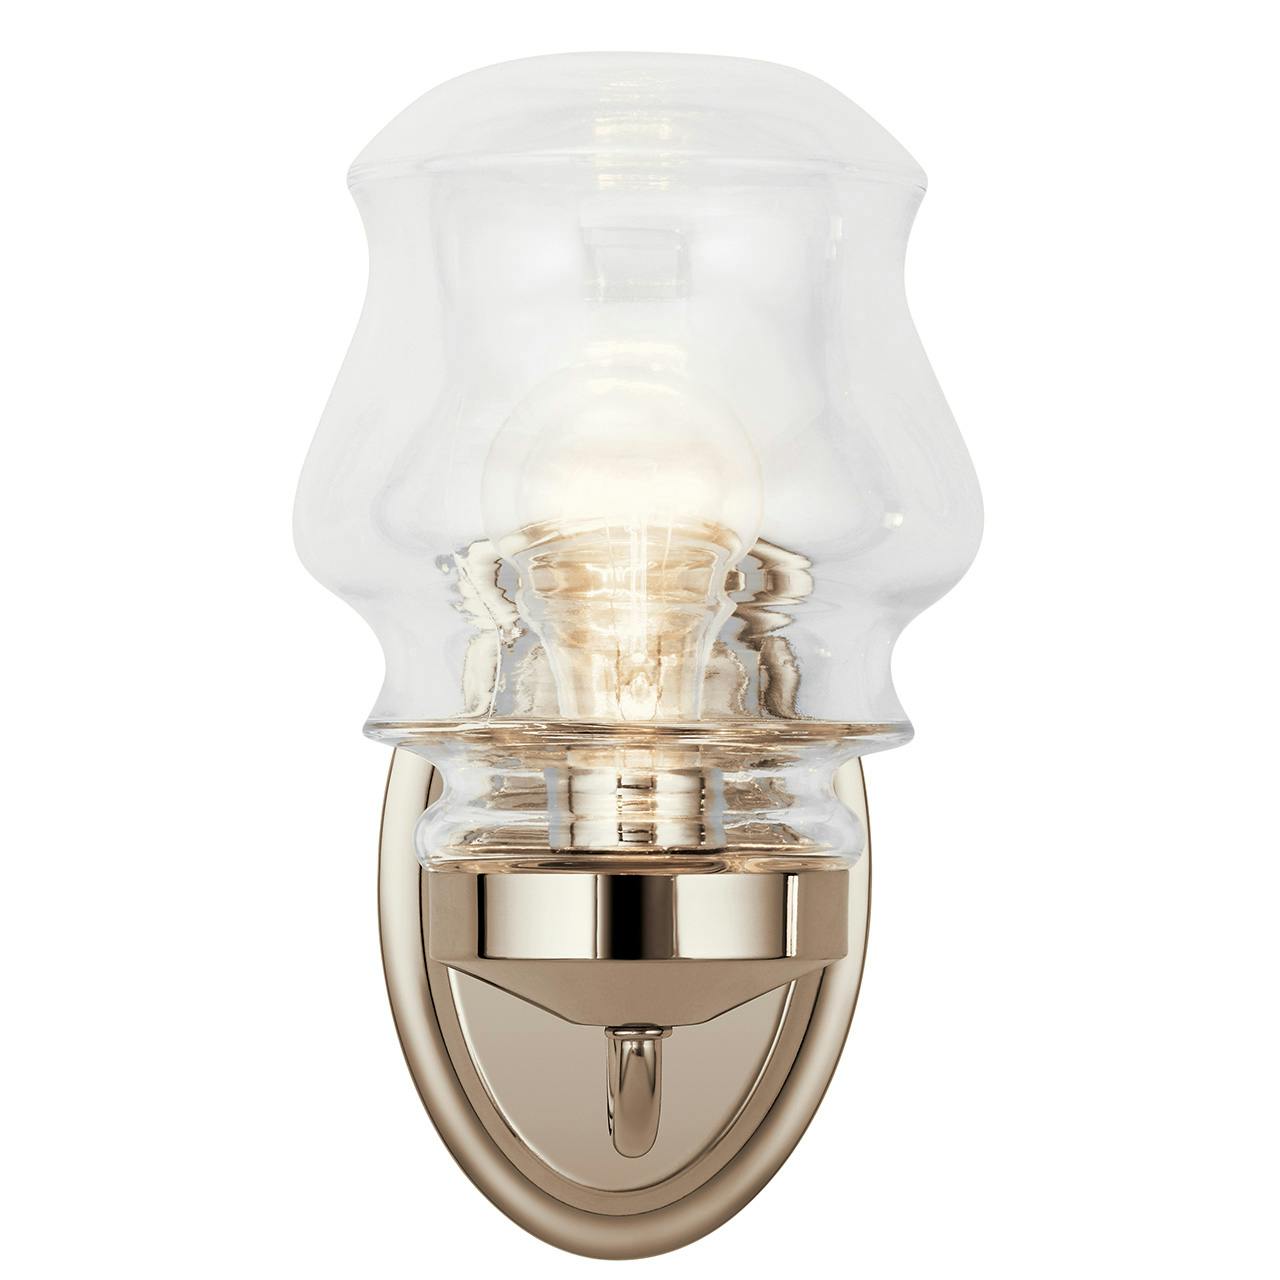 The Janiel 10.75" 1 Light Sconce Nickel facing up on a white background